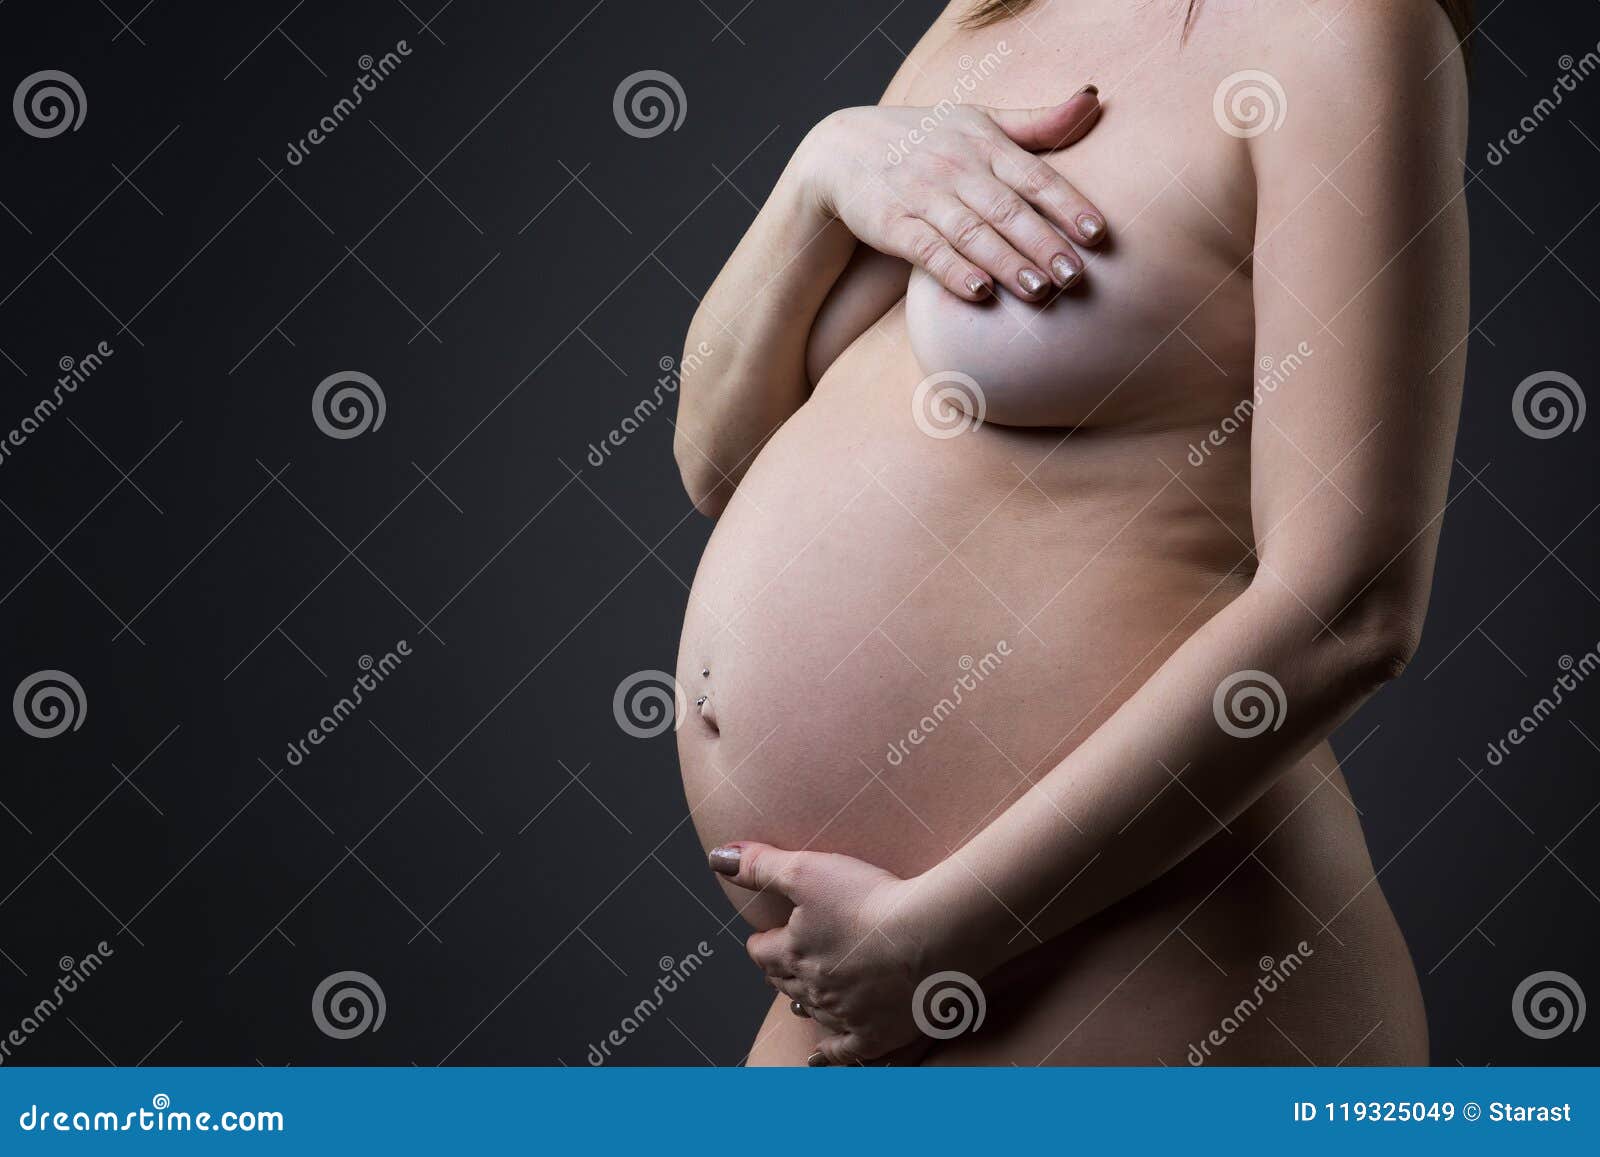 Embrace the beauty of pregnancy nude photos of a 9 month pregnant woman